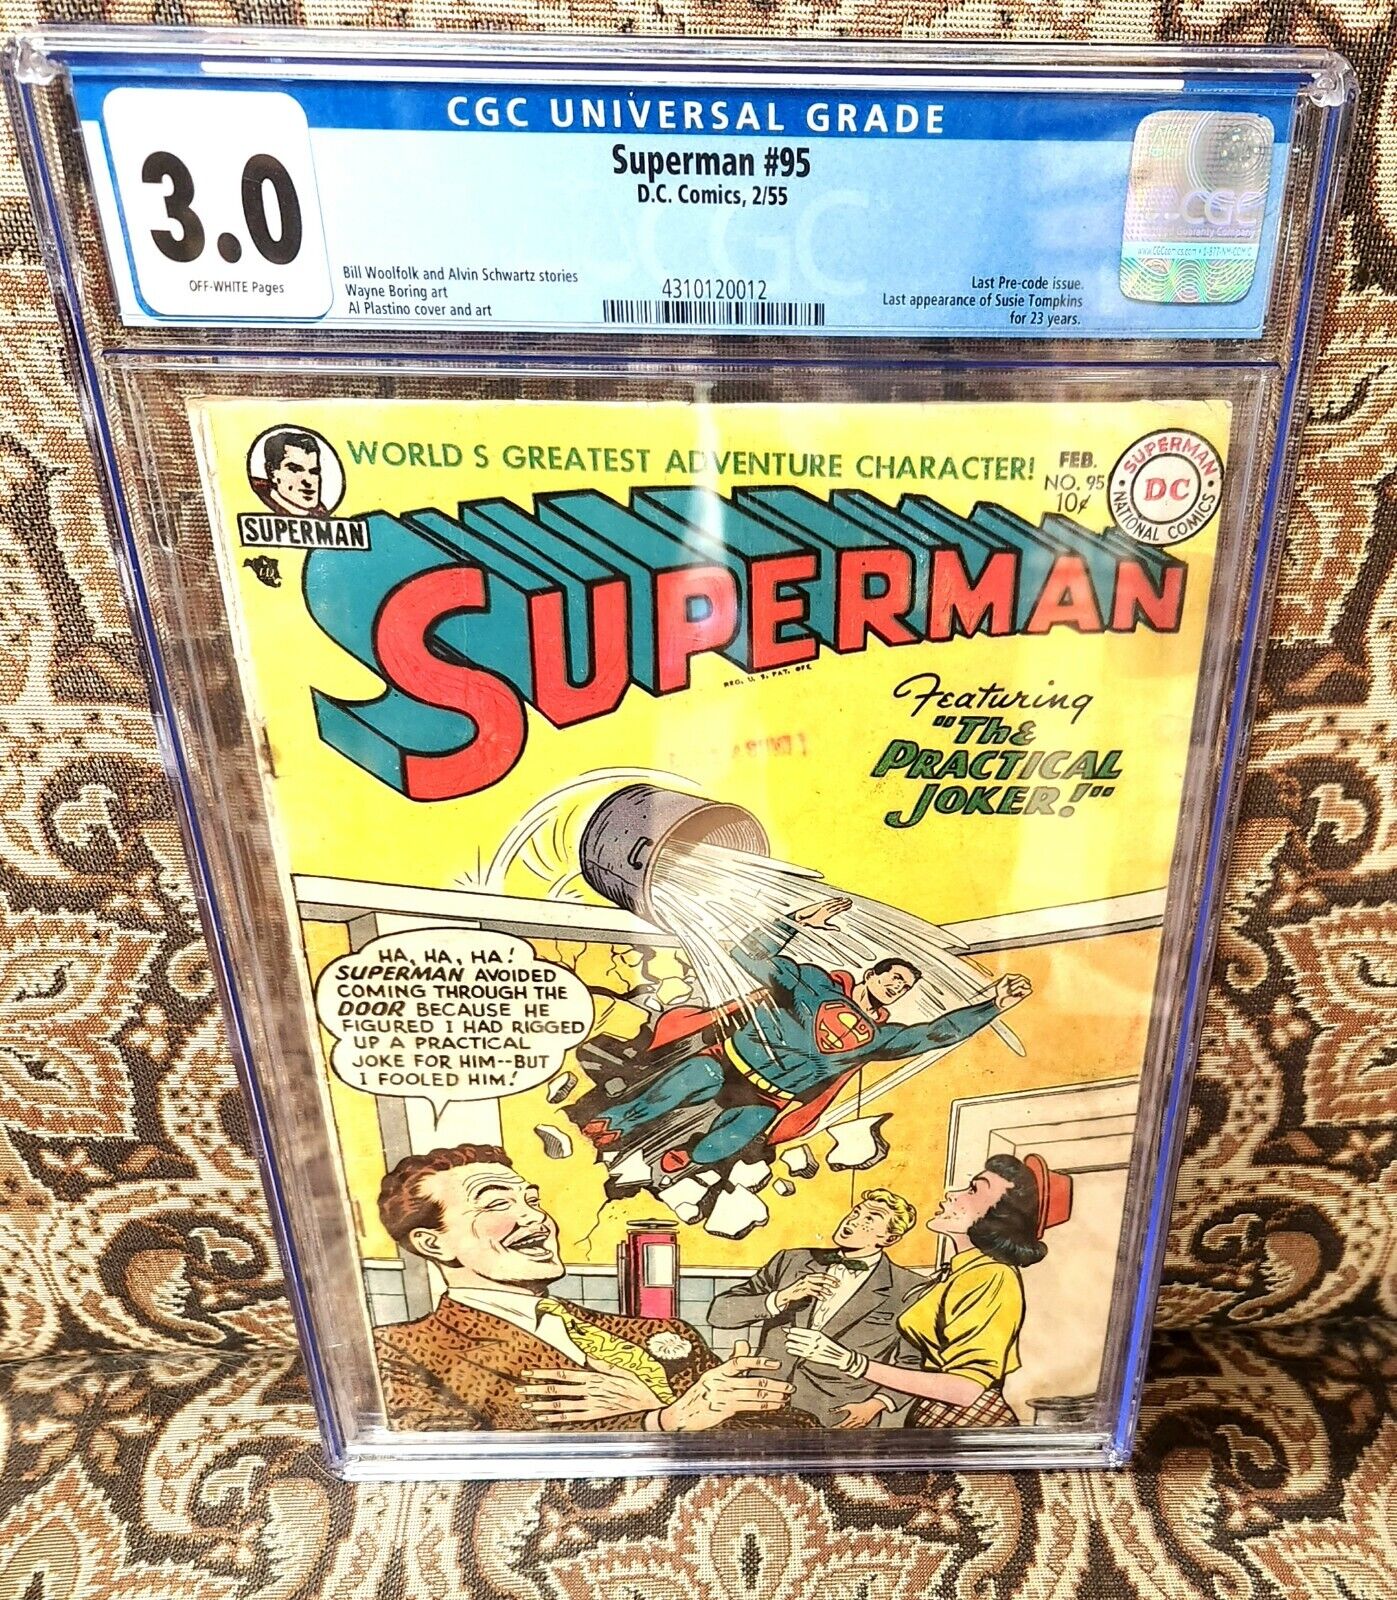 SUPERMAN 95 CGC 30 OFFWHITE PAGES LAST PRE CODE ISSUE Golden Age DC 1955